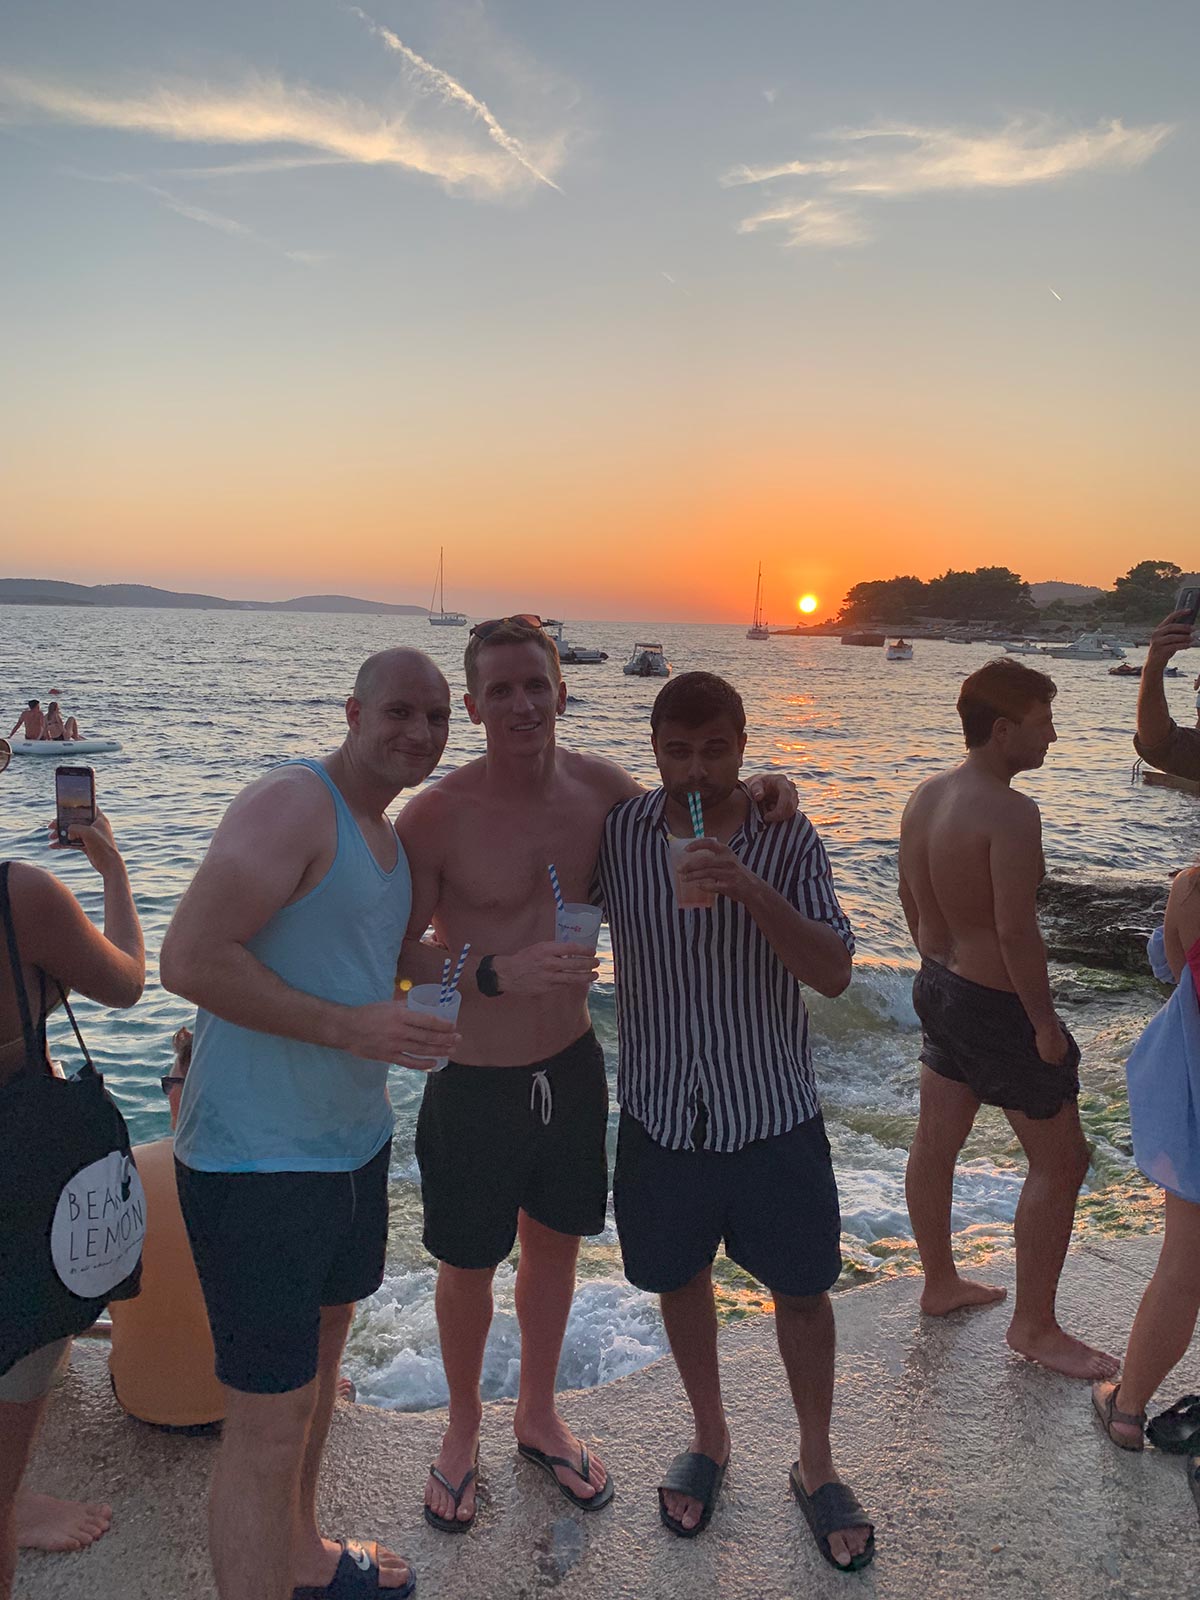 David Simpson and friends during sunset at beach in Hvar, Croatia. The booze cruise in Split that wasnt